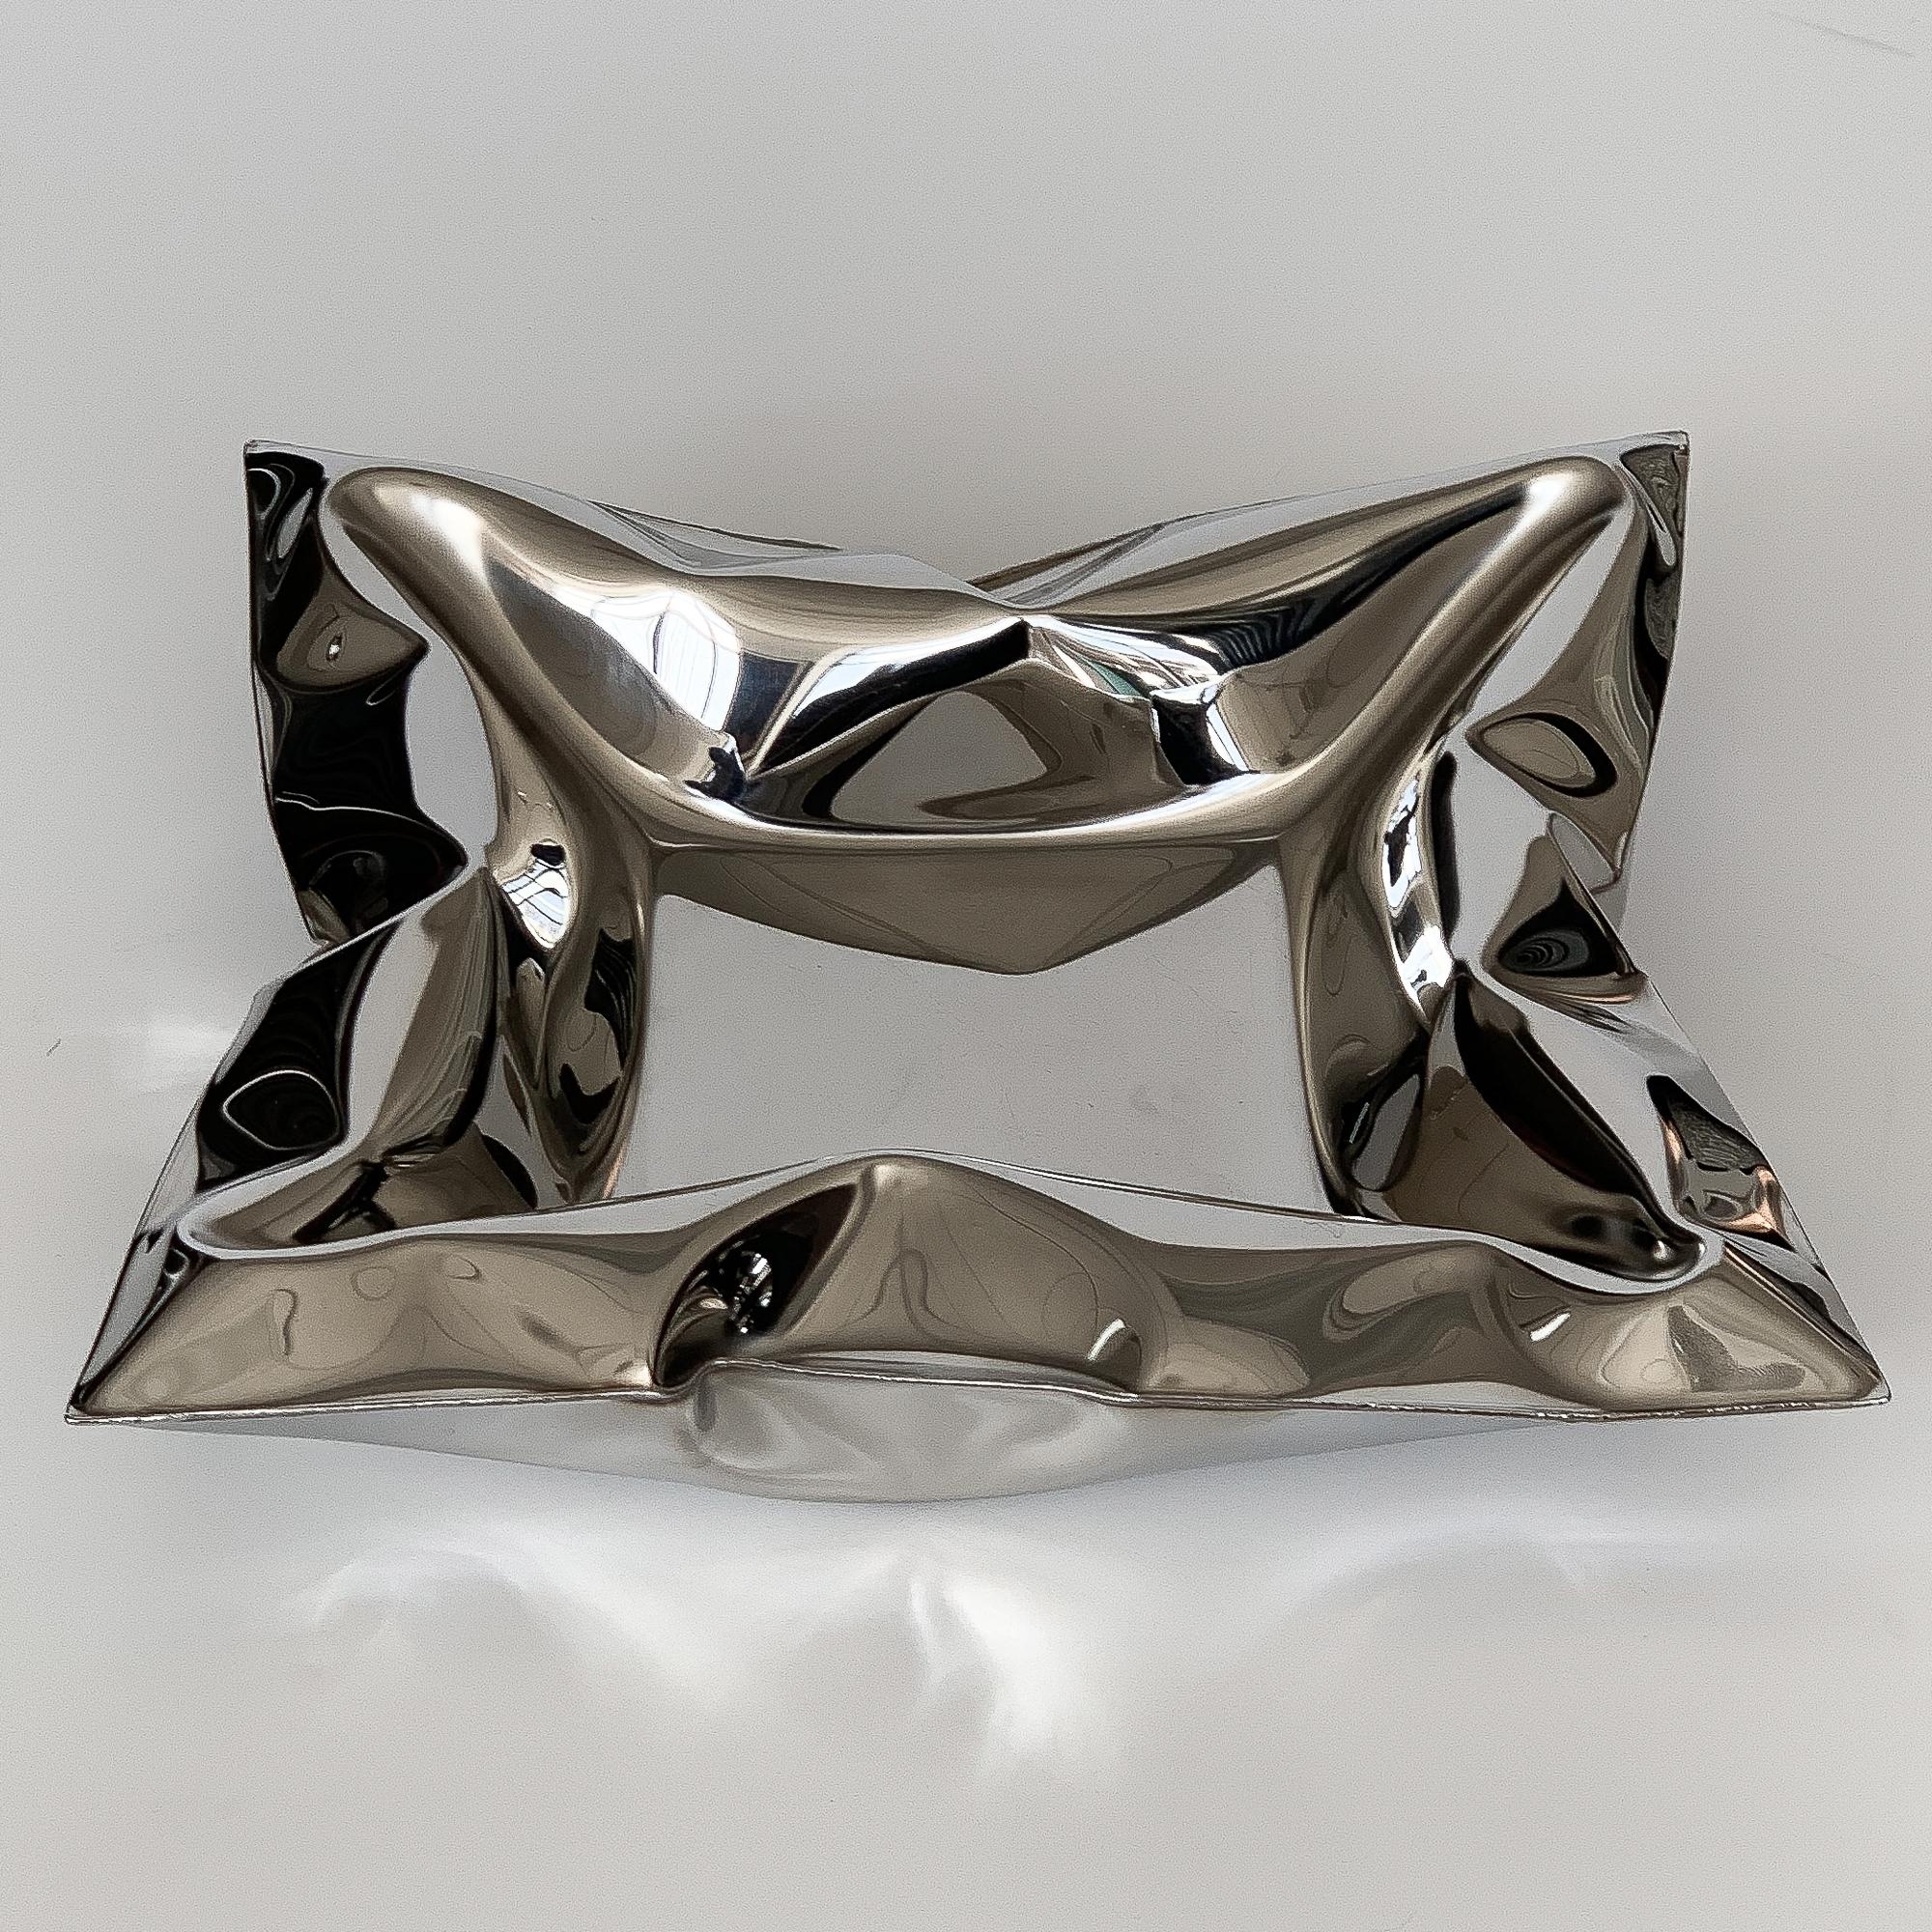 Stephen Newby inflated mirror polished stainless steel bowl from the early Full Blown series, circa 1990s. Unsigned. Minor surface scratches to the interior of the bowl. 

Sculptor and artist Stephen Newby began working with inflating stainless